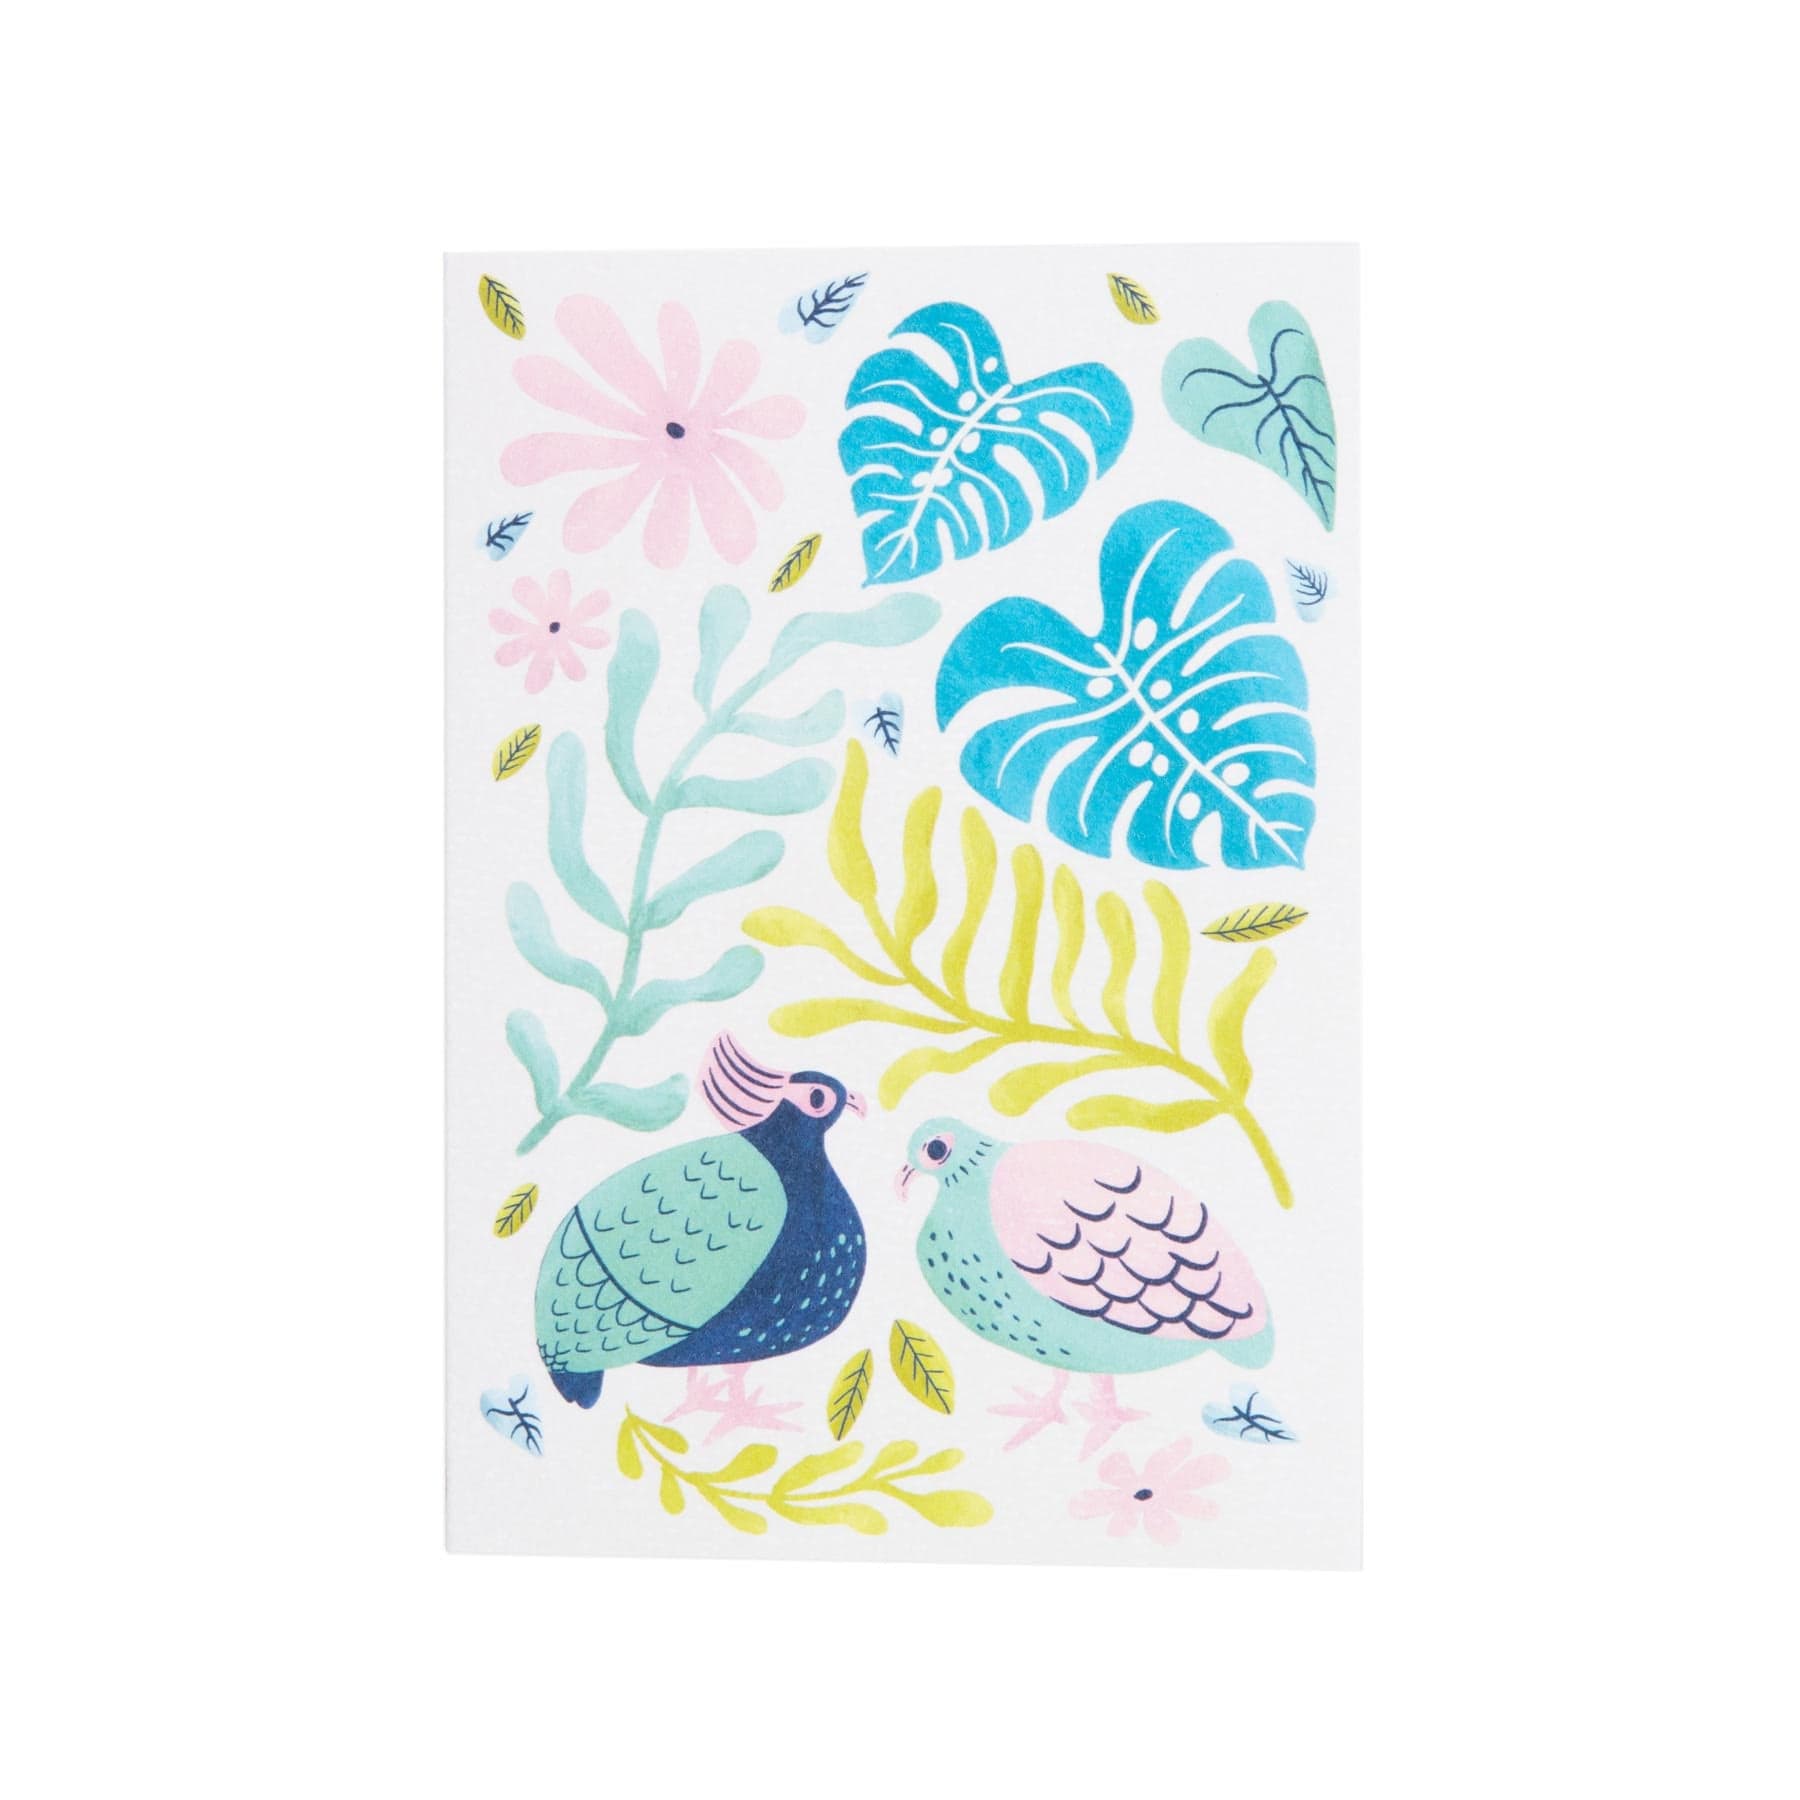 Roul roul illustrated card